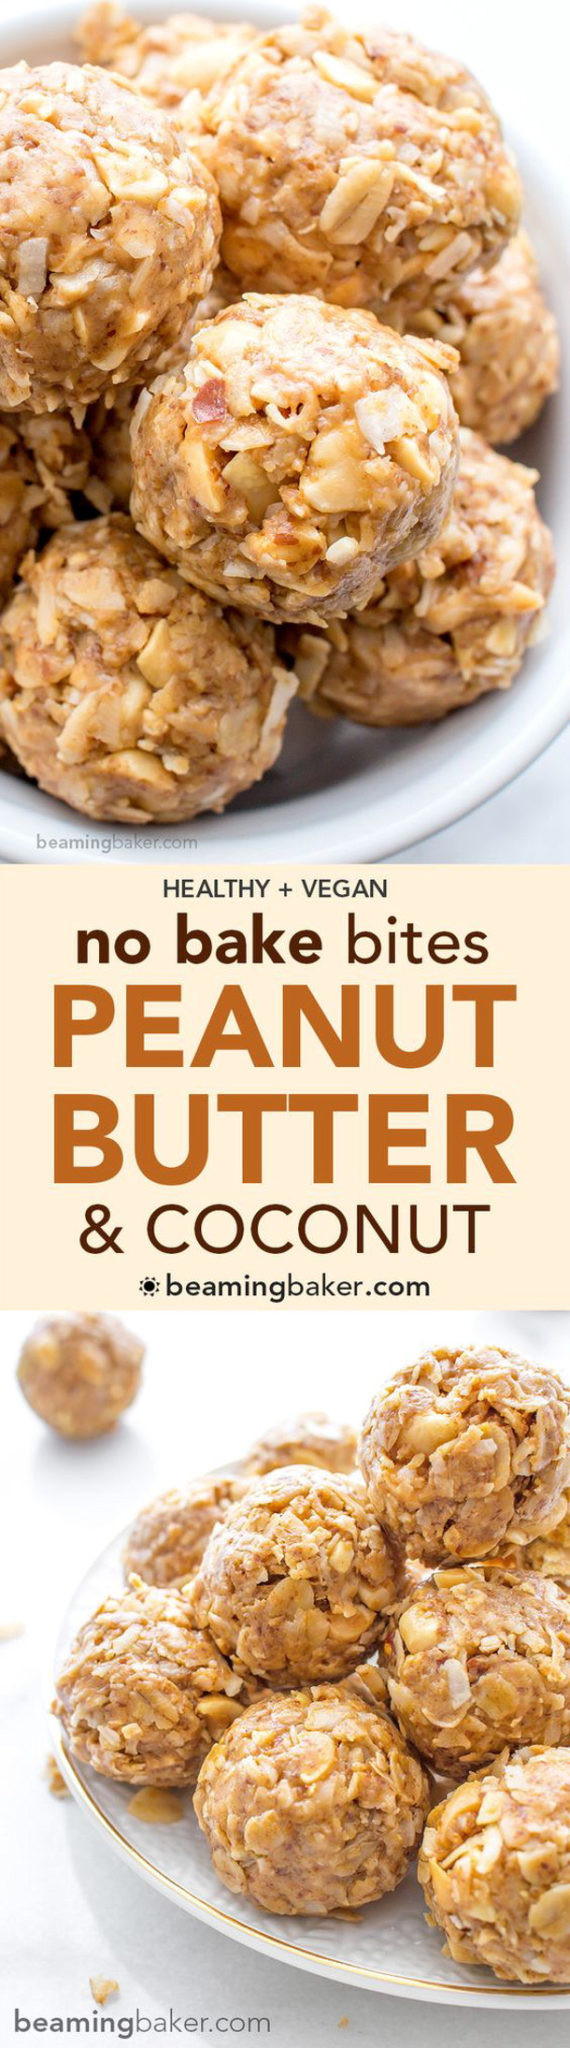 No Cook Vegetarian Recipes
 Healthy Snacks and Treats Recipes The BEST and Yummiest